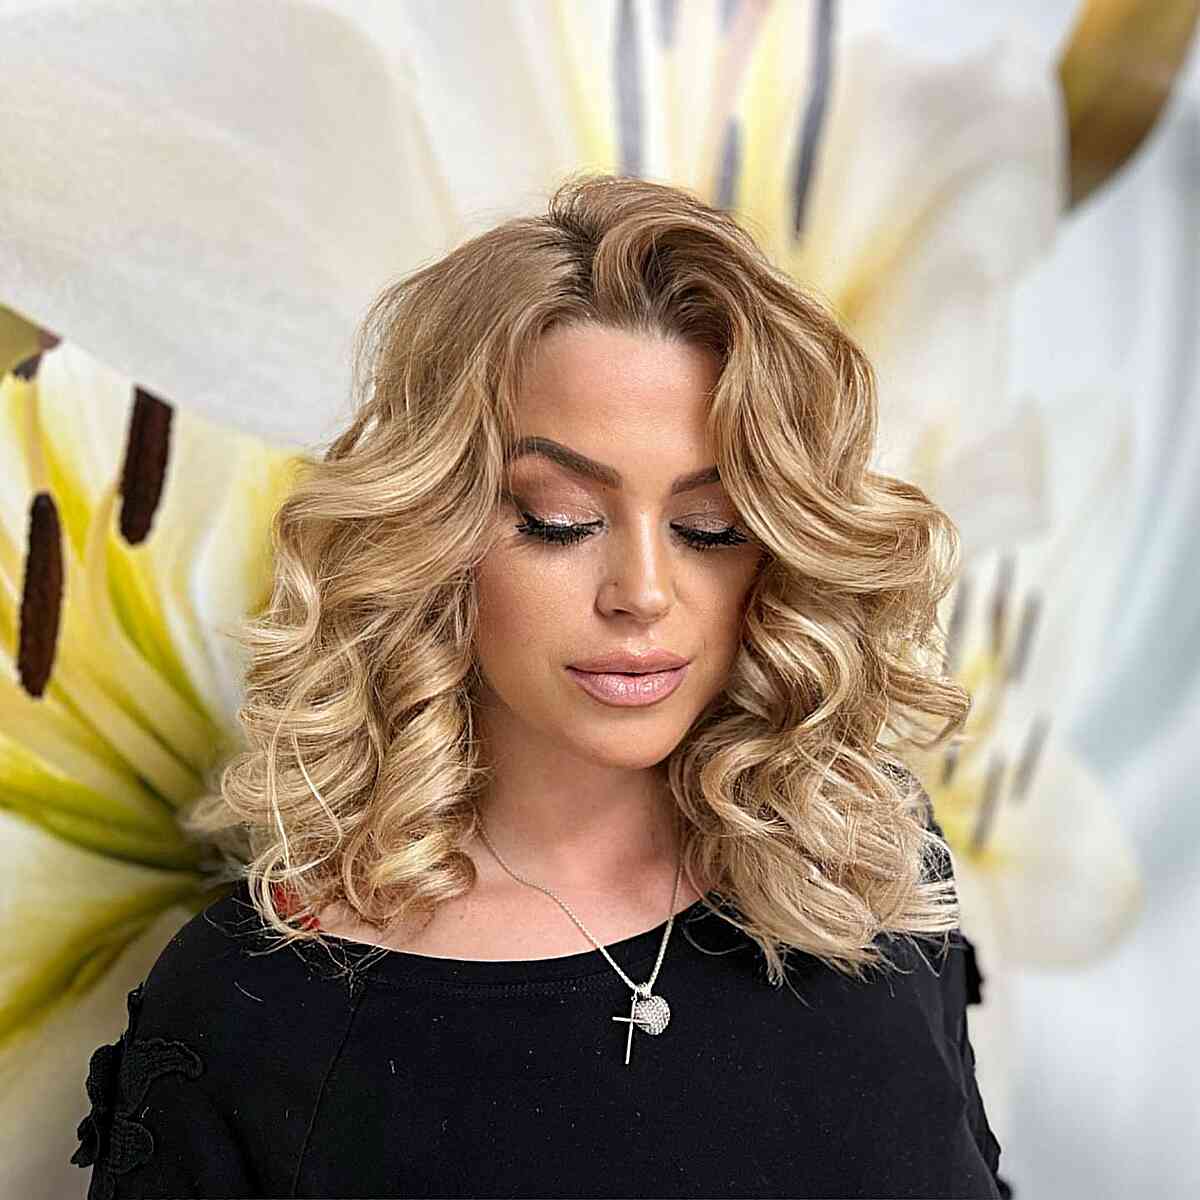 Curled, All-Over Blonde